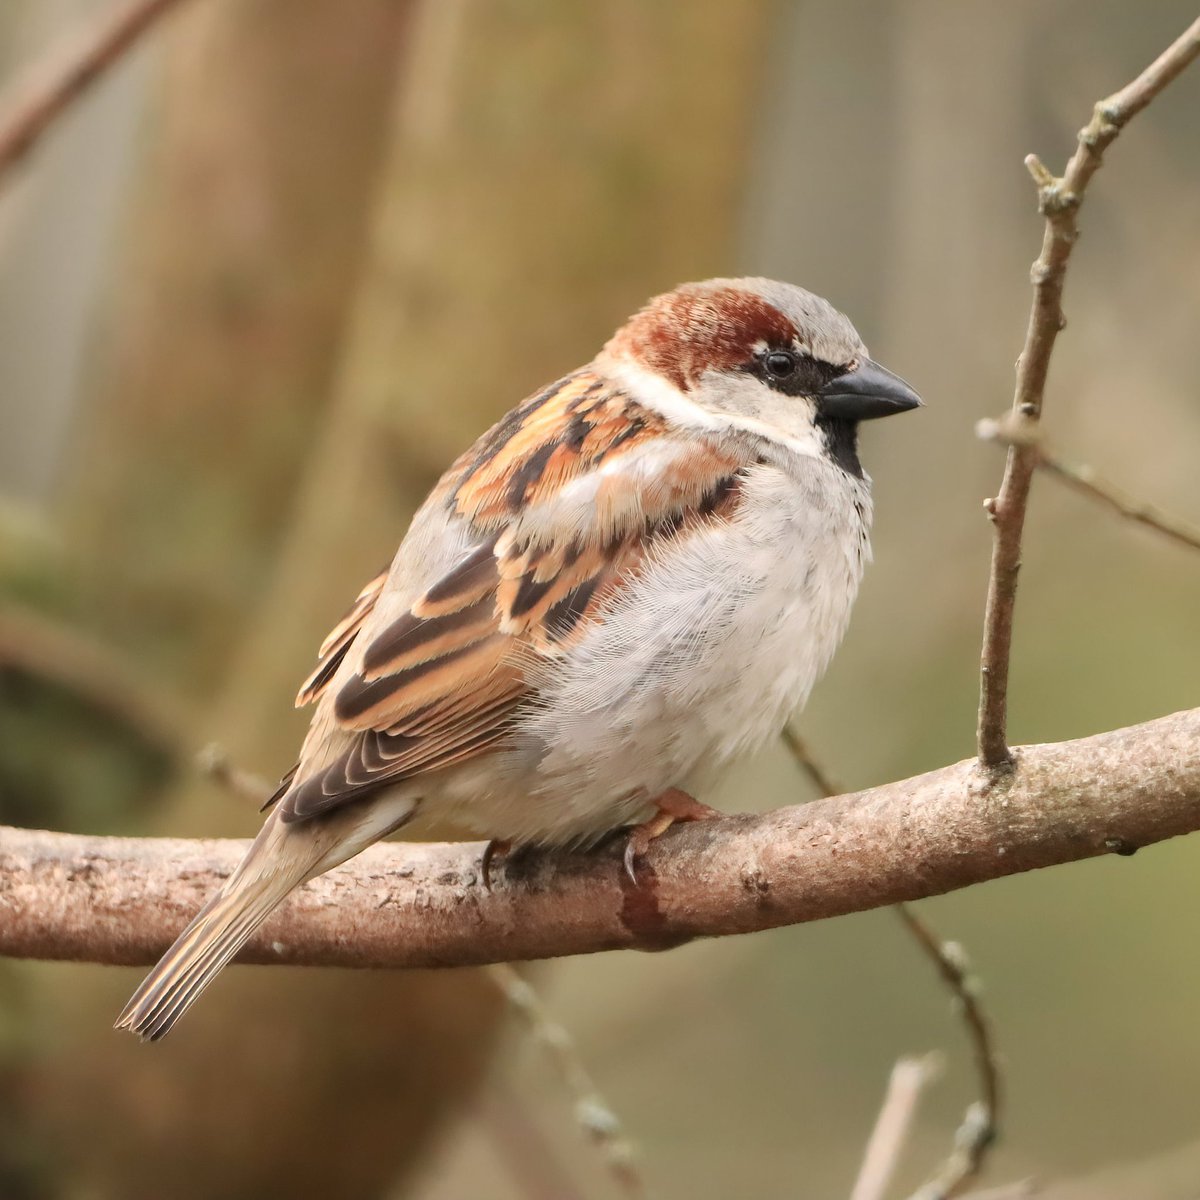 Did you know that the house sparrow was among the first animals to be given a scientific name in the modern system of biological classification?
#housesparrows #housesparrow #didyouknow #ohiobirdworld #ohiobirdlovers #birdlovers #ohio #birdwatching #birdwatchers #birdlife #birds